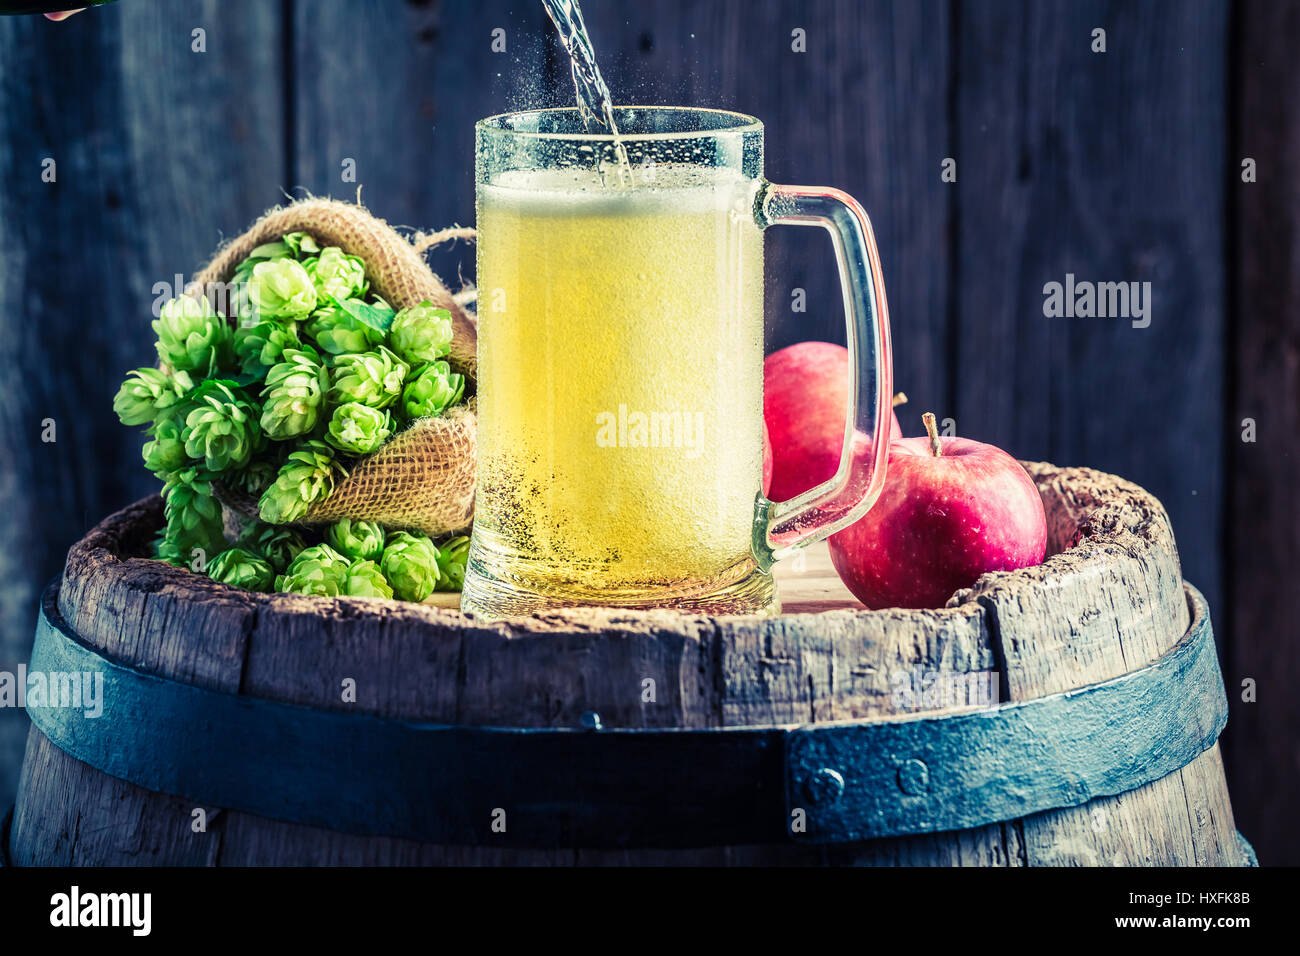 Fresh cider beer with apples, wheat and hops Stock Photo